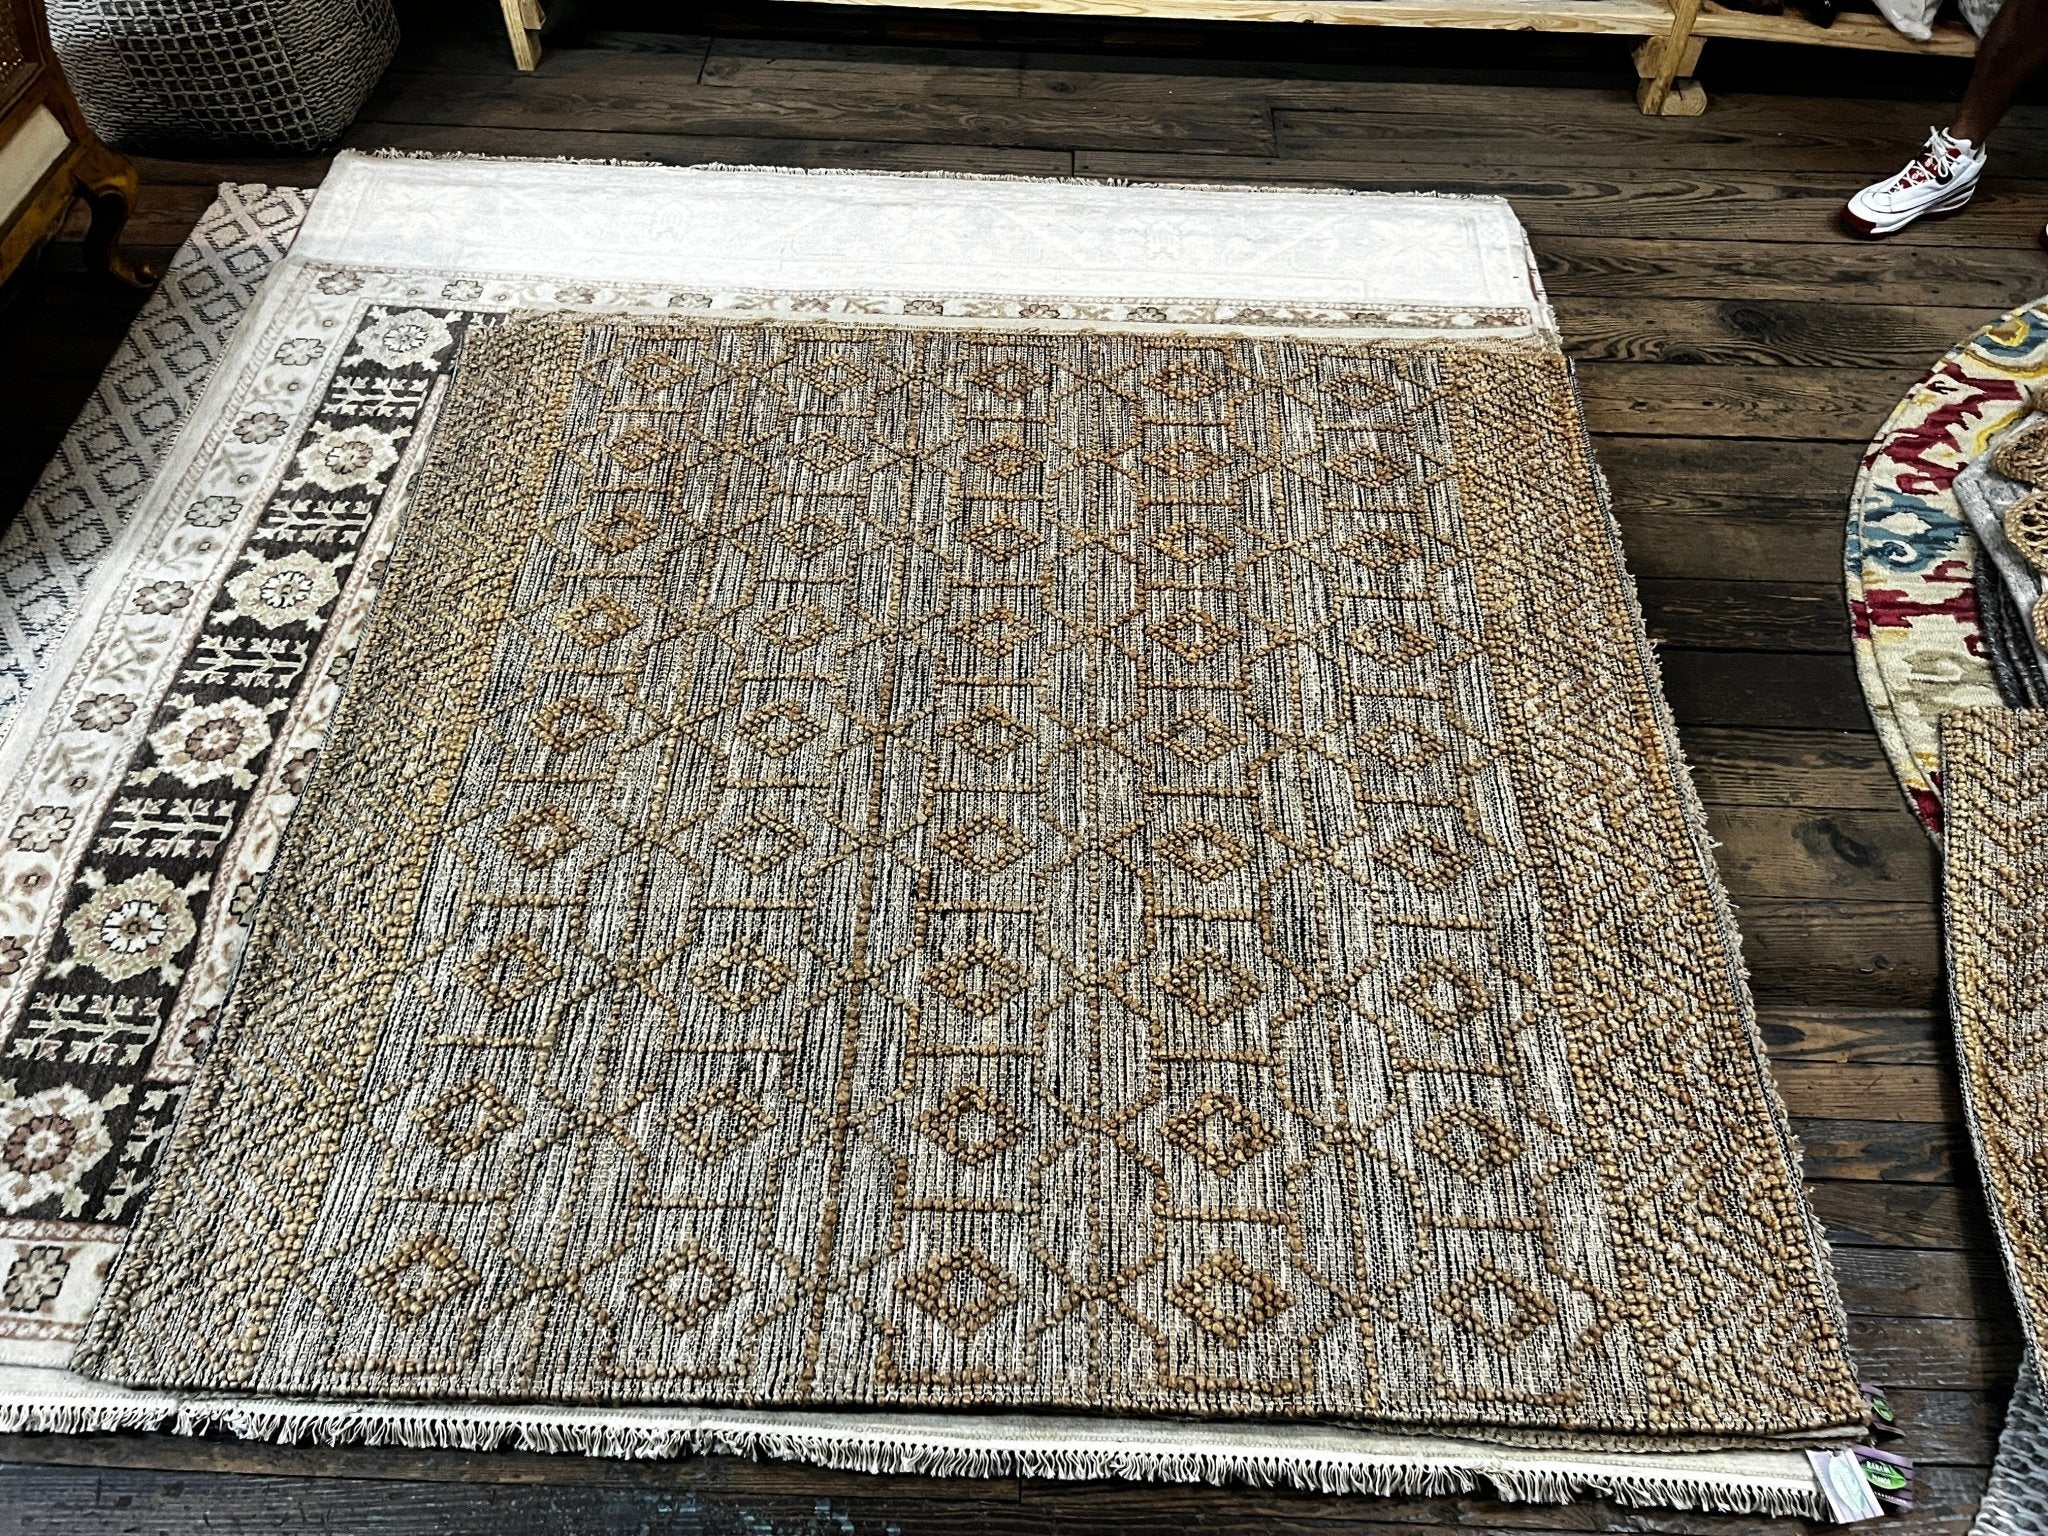 Boom Boom 6x6 Square Handwoven Jute Rug (Assorted Designs) | Banana Manor Rug Factory Outlet